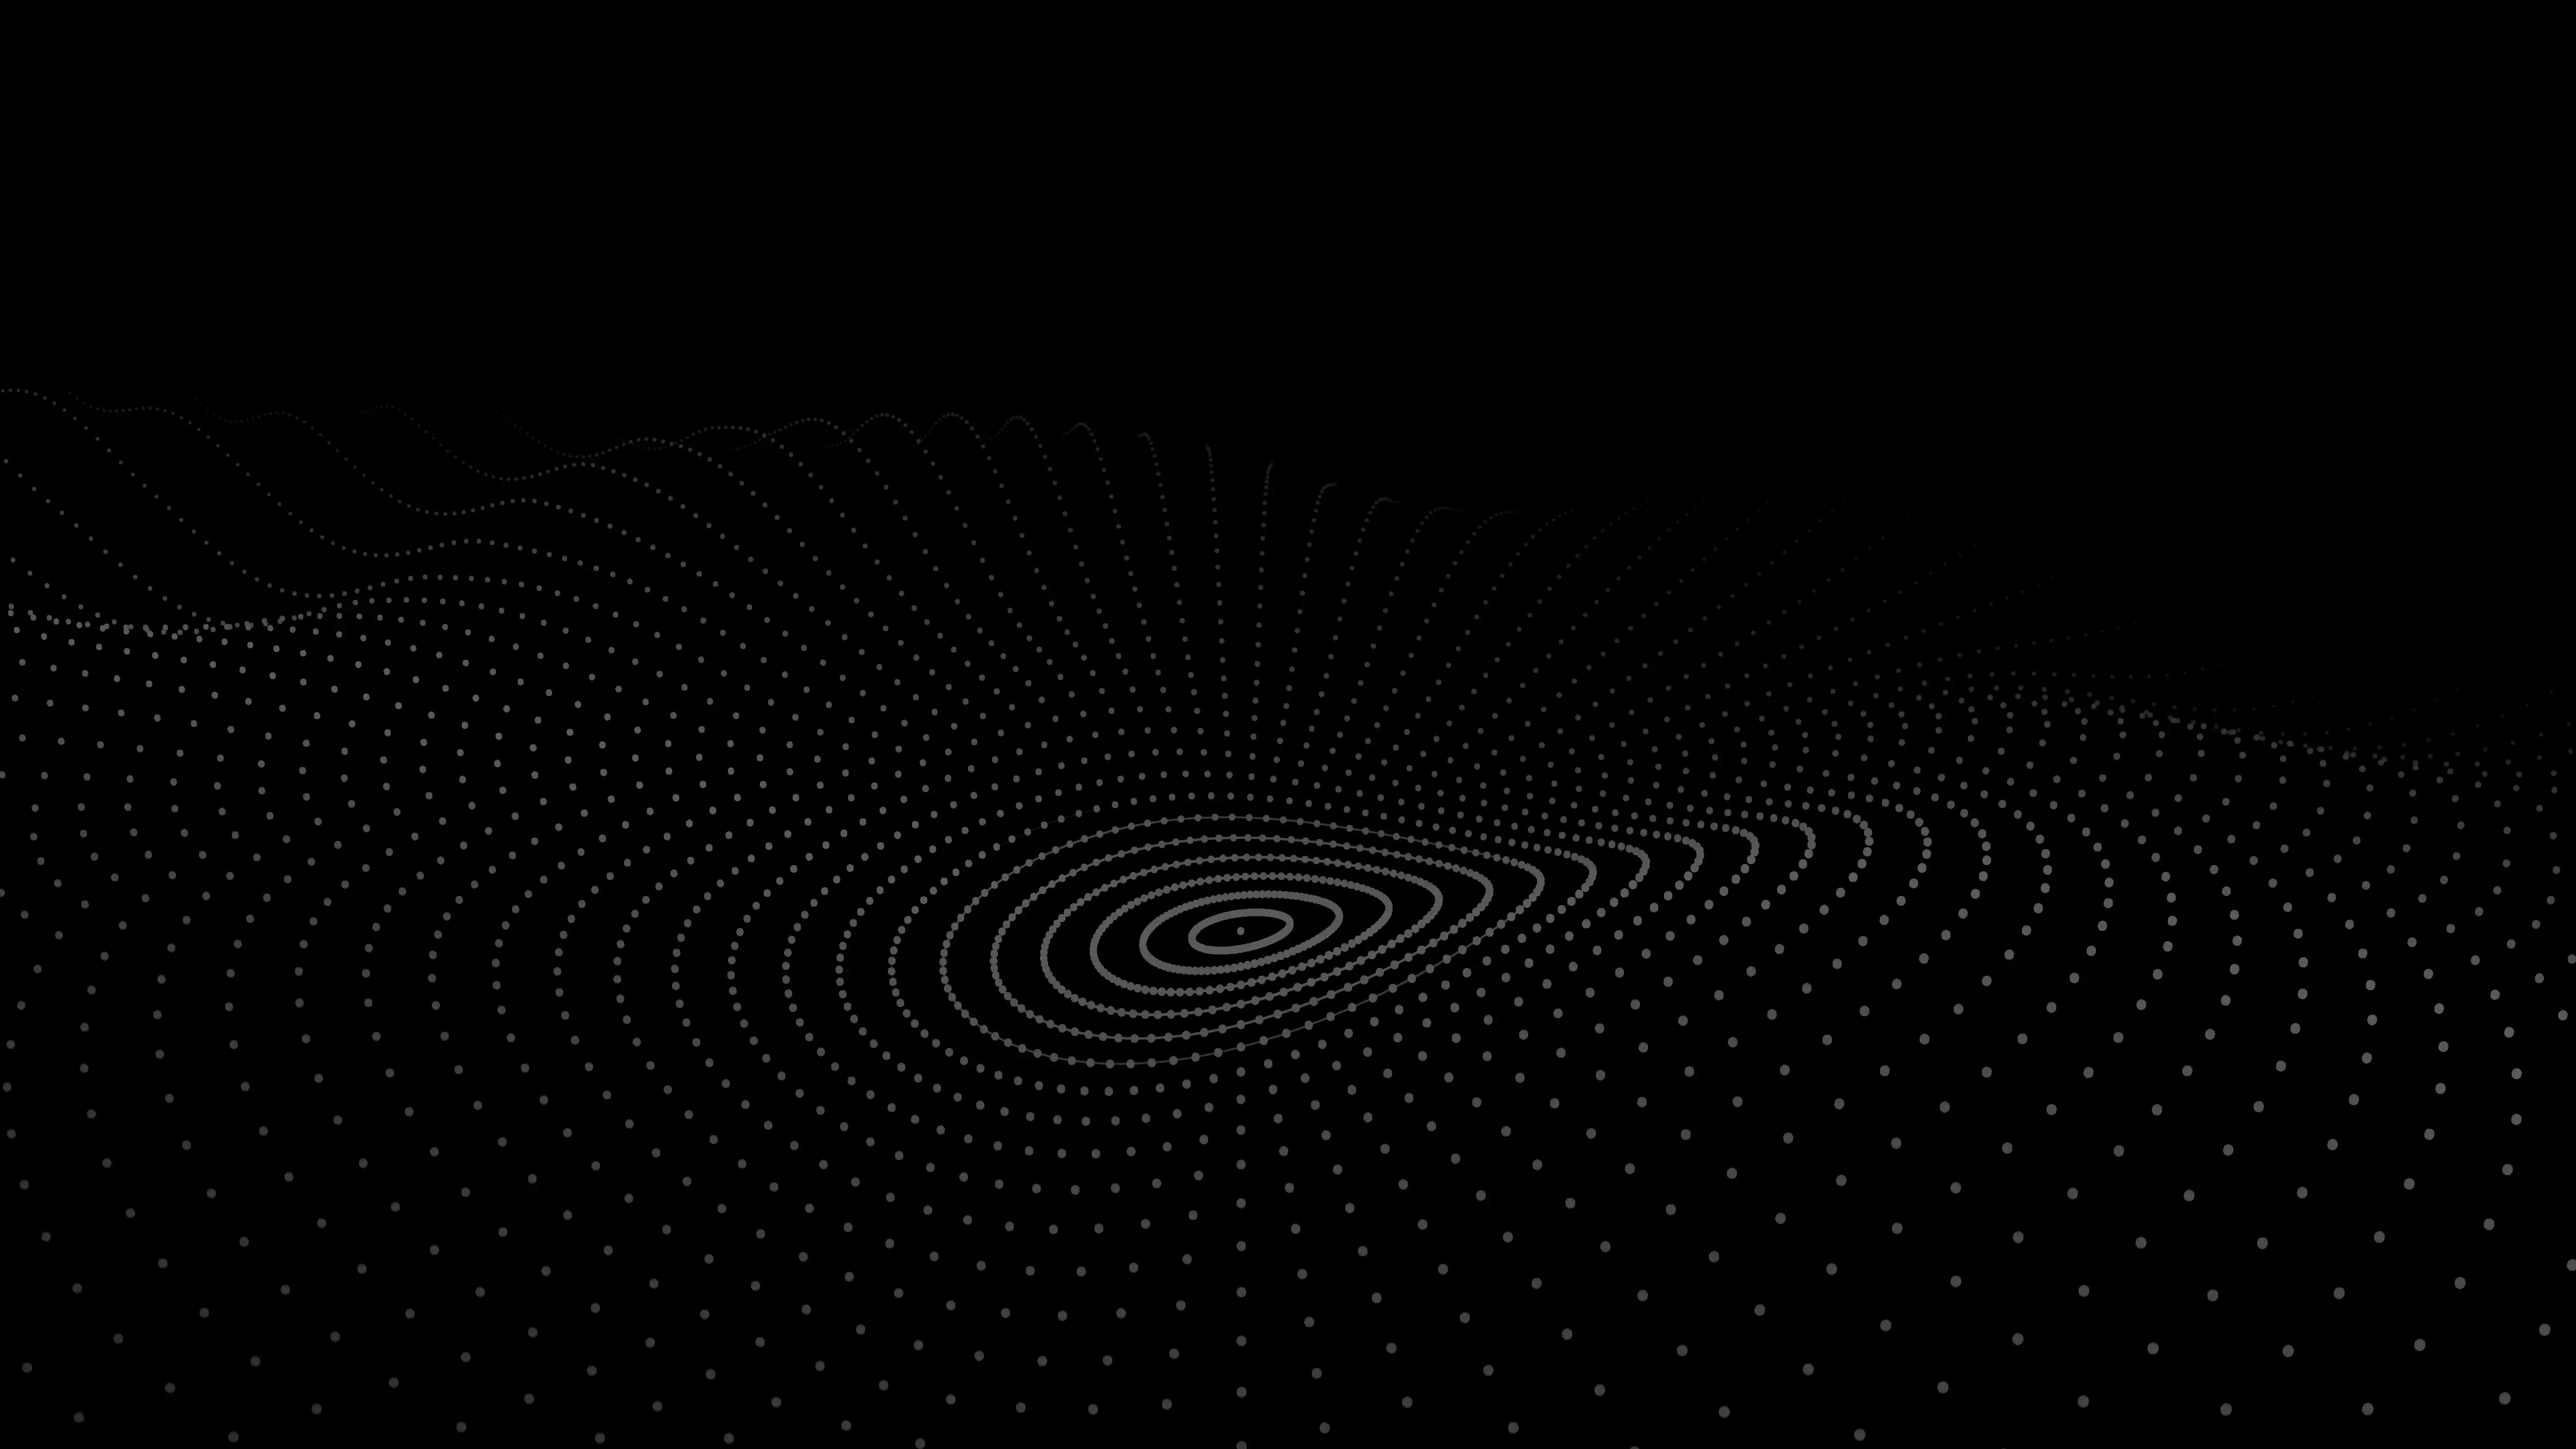 Black background with grey dots forming a wave in circle formation.